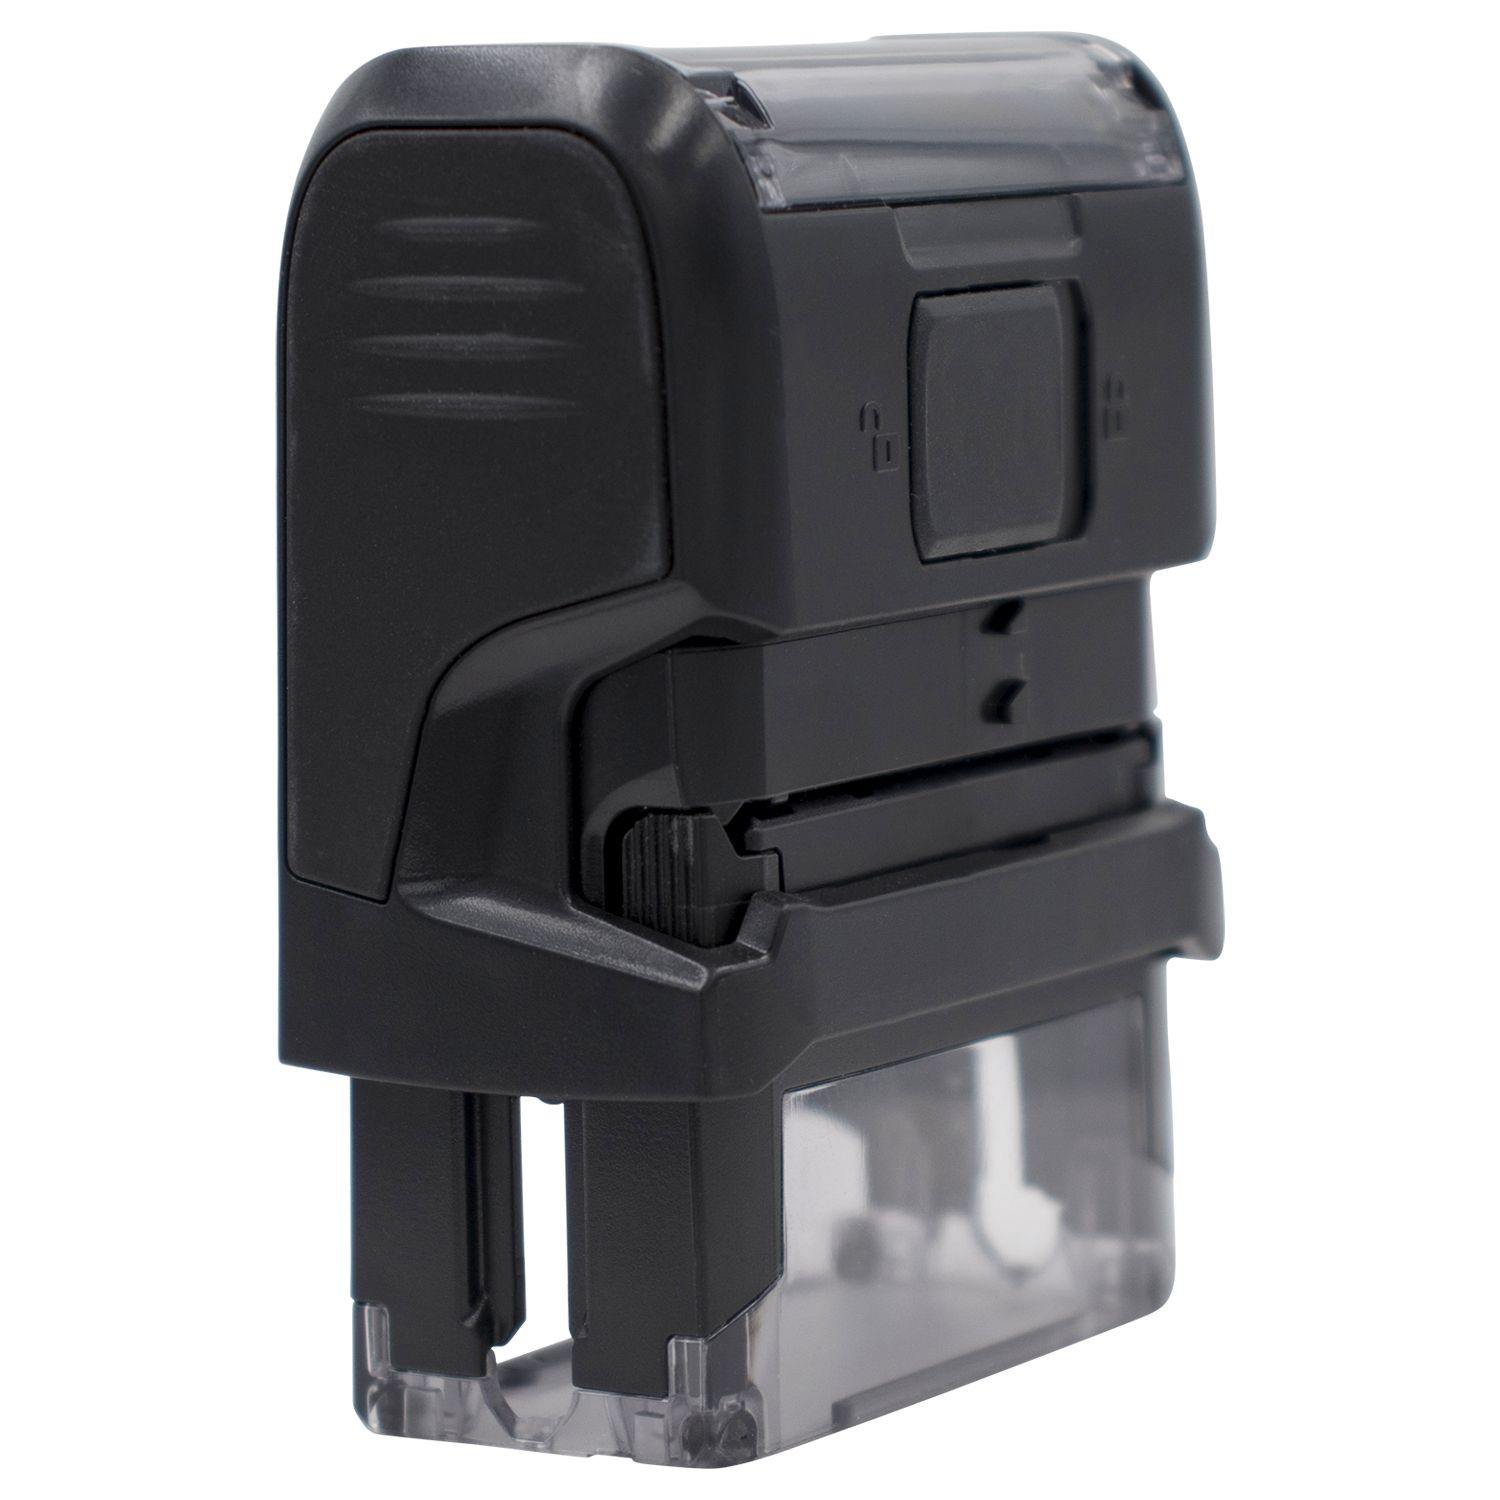 Self-Inking Despachado Stamp - Engineer Seal Stamps - Brand_Trodat, Impression Size_Small, Stamp Type_Self-Inking Stamp, Type of Use_Office, Type of Use_Shipping & Receiving